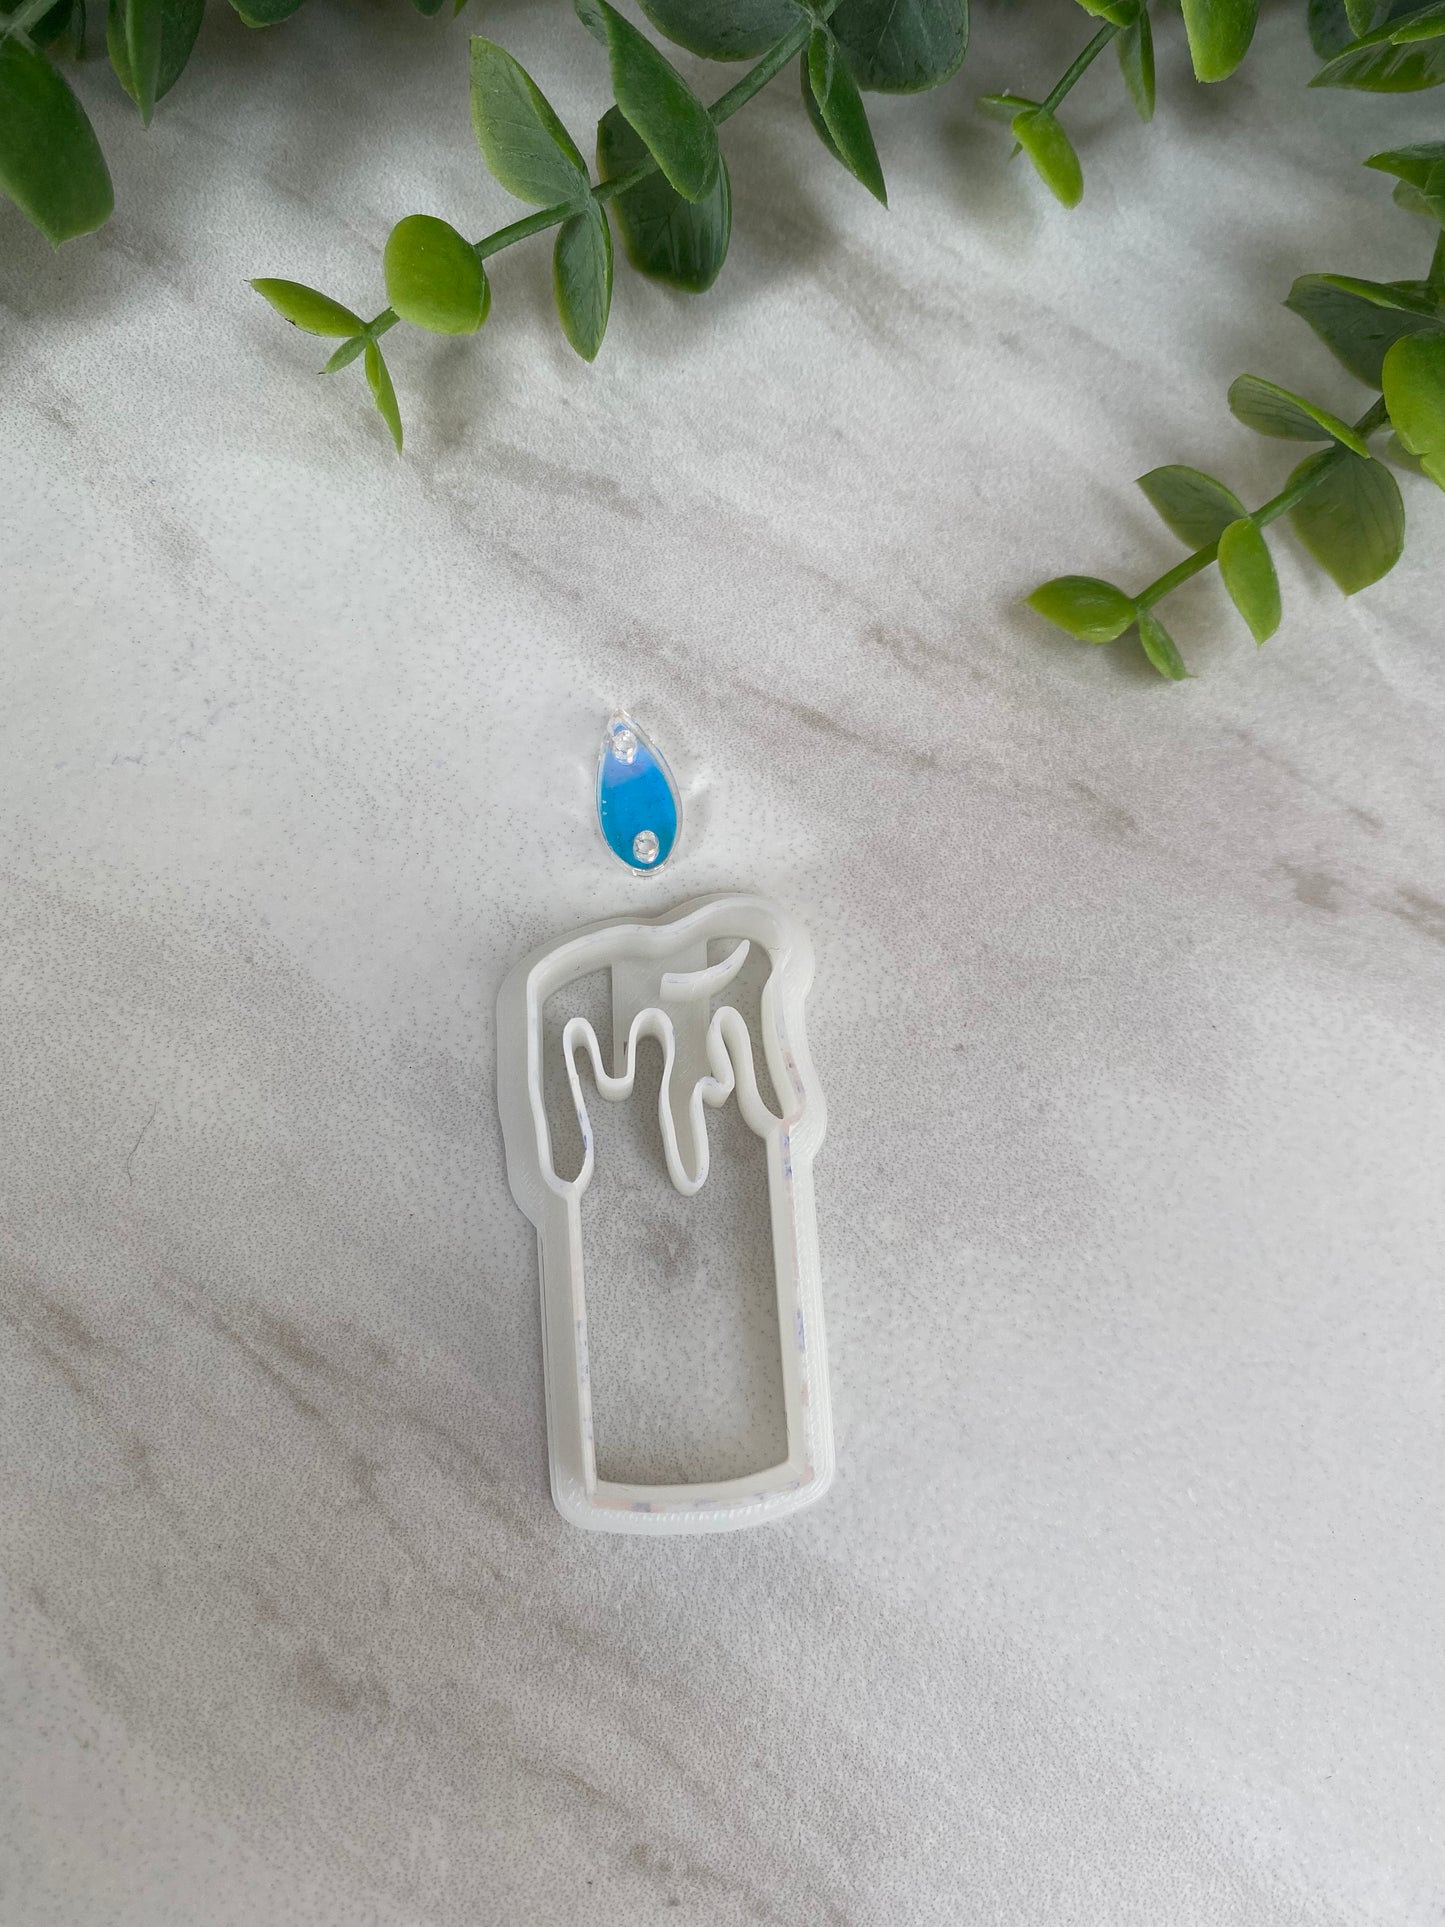 Melting Candle - Polymer Clay Cutter